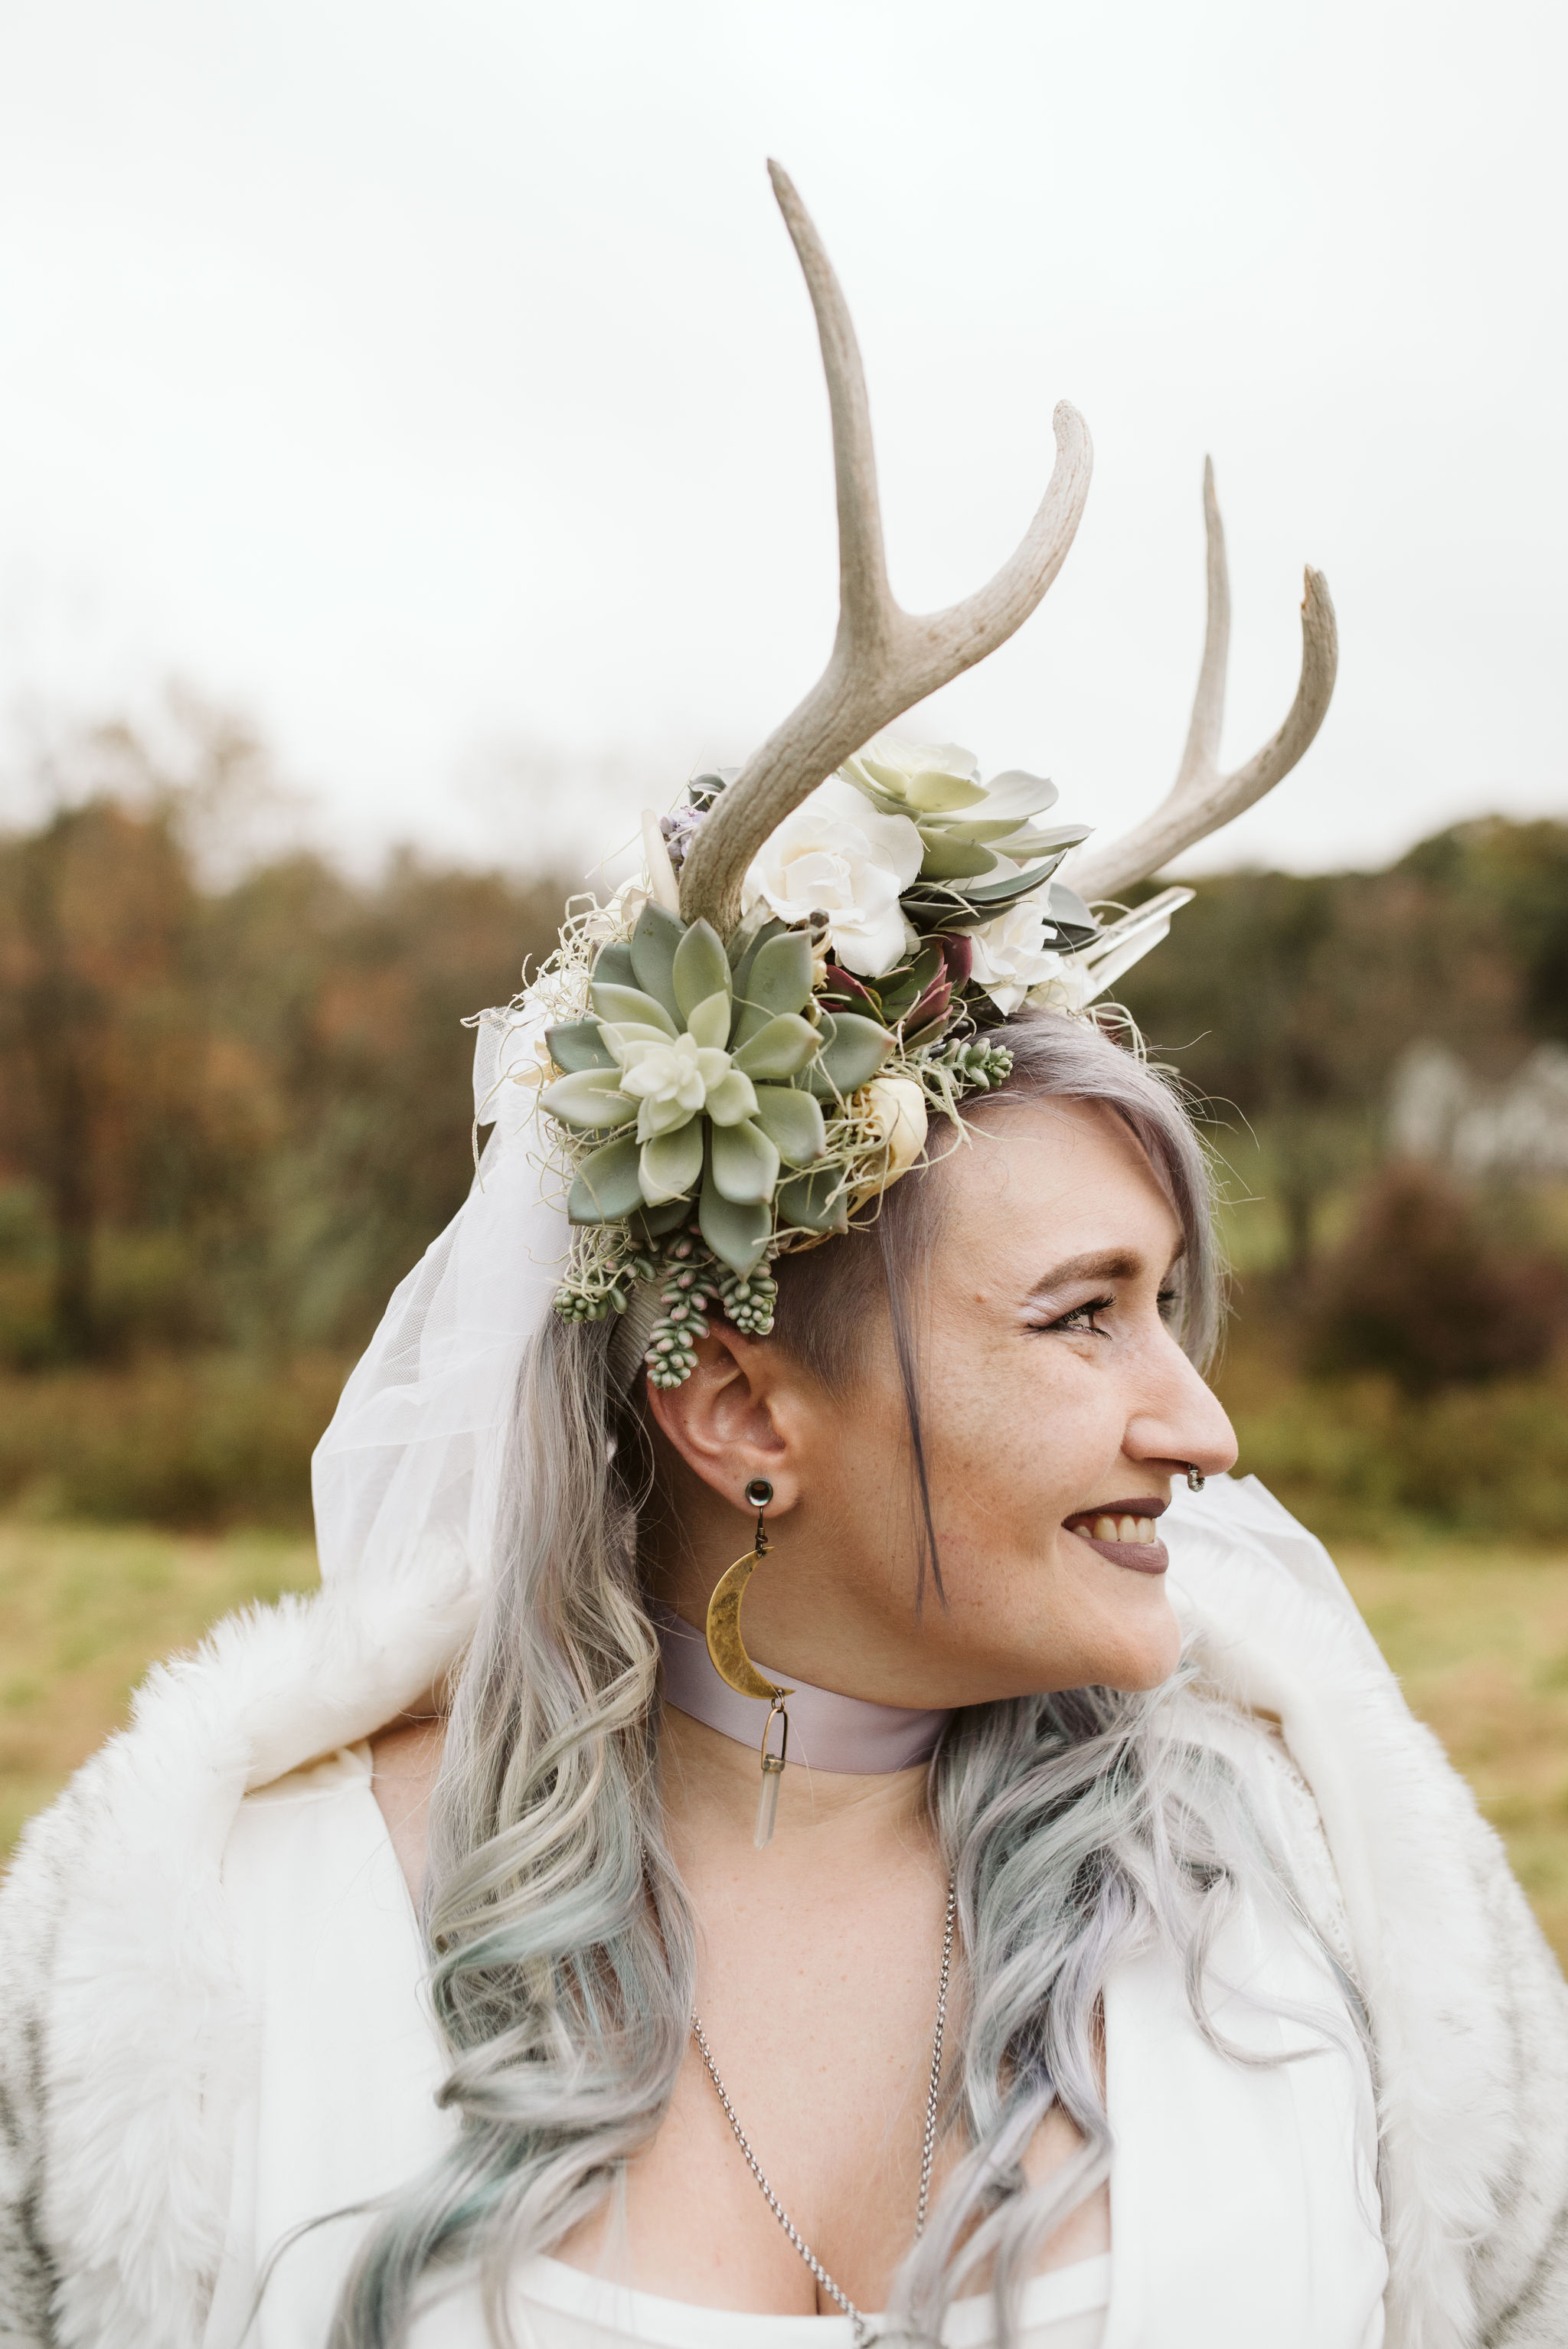  Maryland, Baltimore Wedding Photographer, Backyard Wedding, Fall, October, Dark Bohemian, Whimsical, Fun, Alternative Bride, Flower Crown with Succulents and Antlers, Bridal Jewelry 